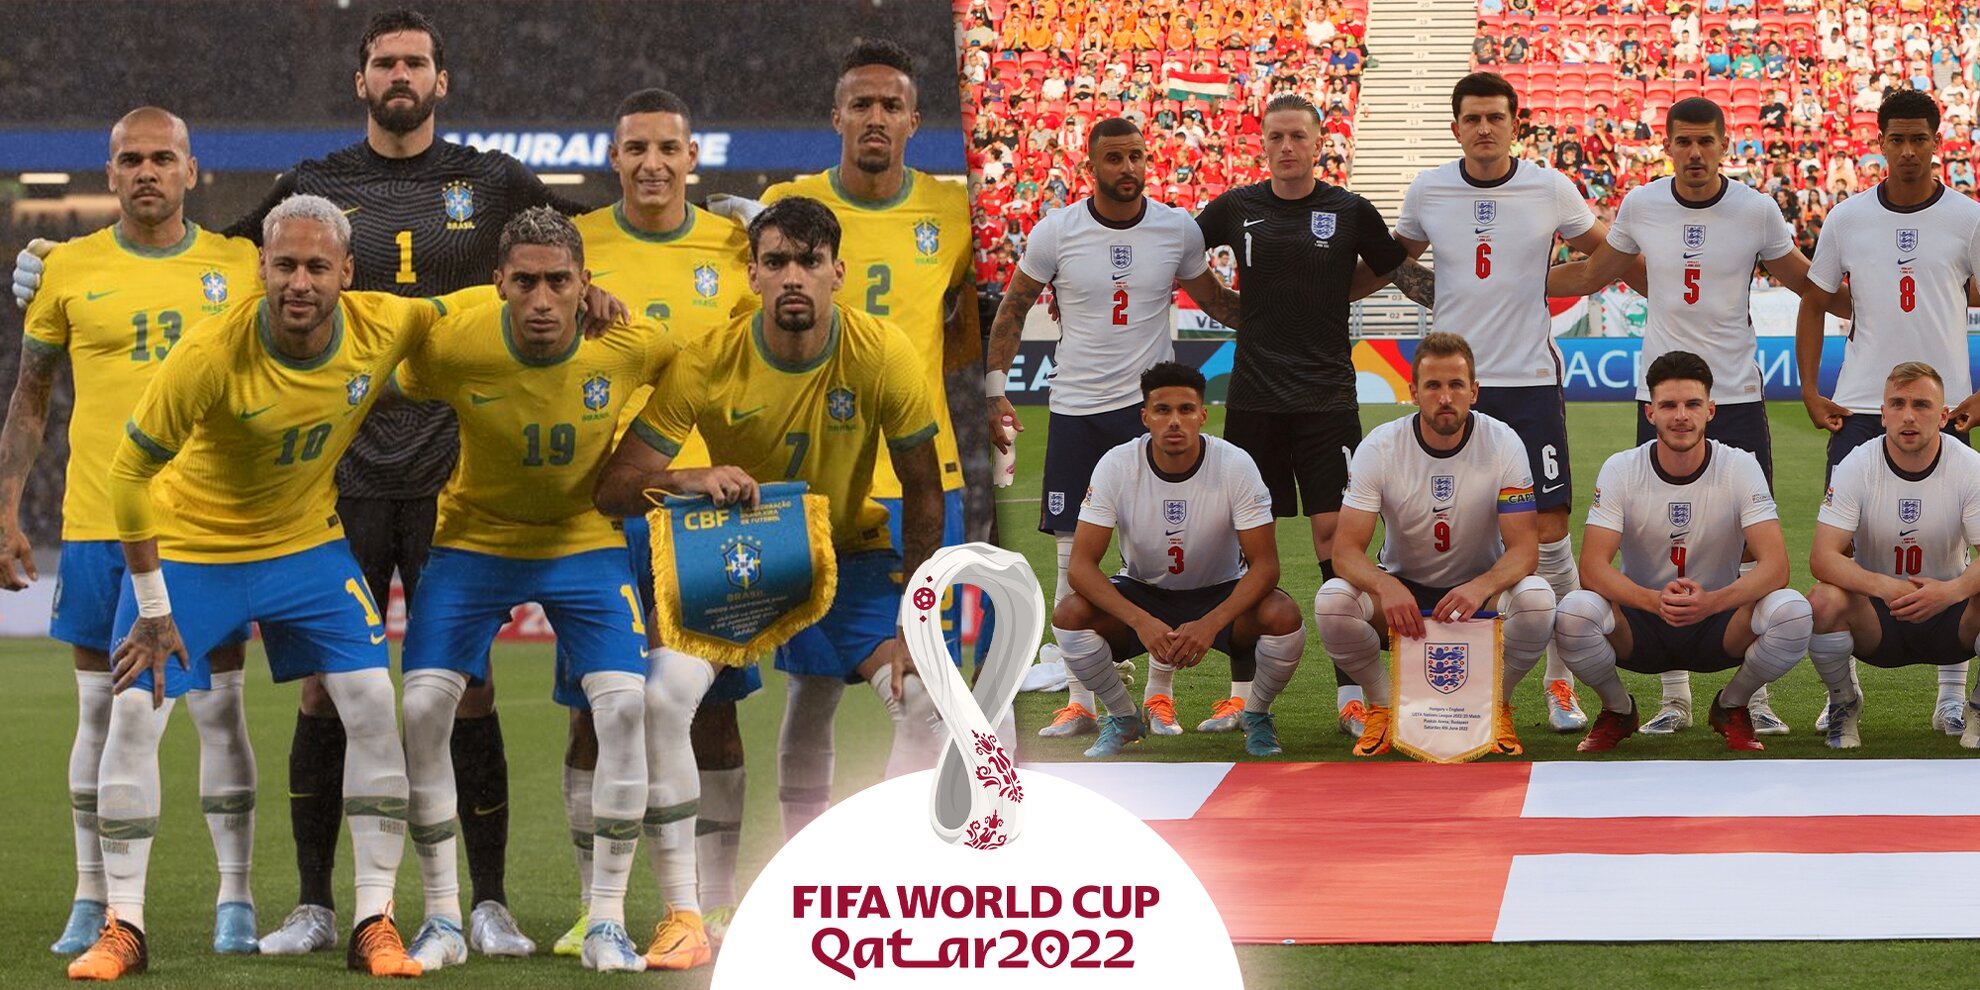 Ranking the top five favorites to win the 2022 Qatar FIFA World Cup